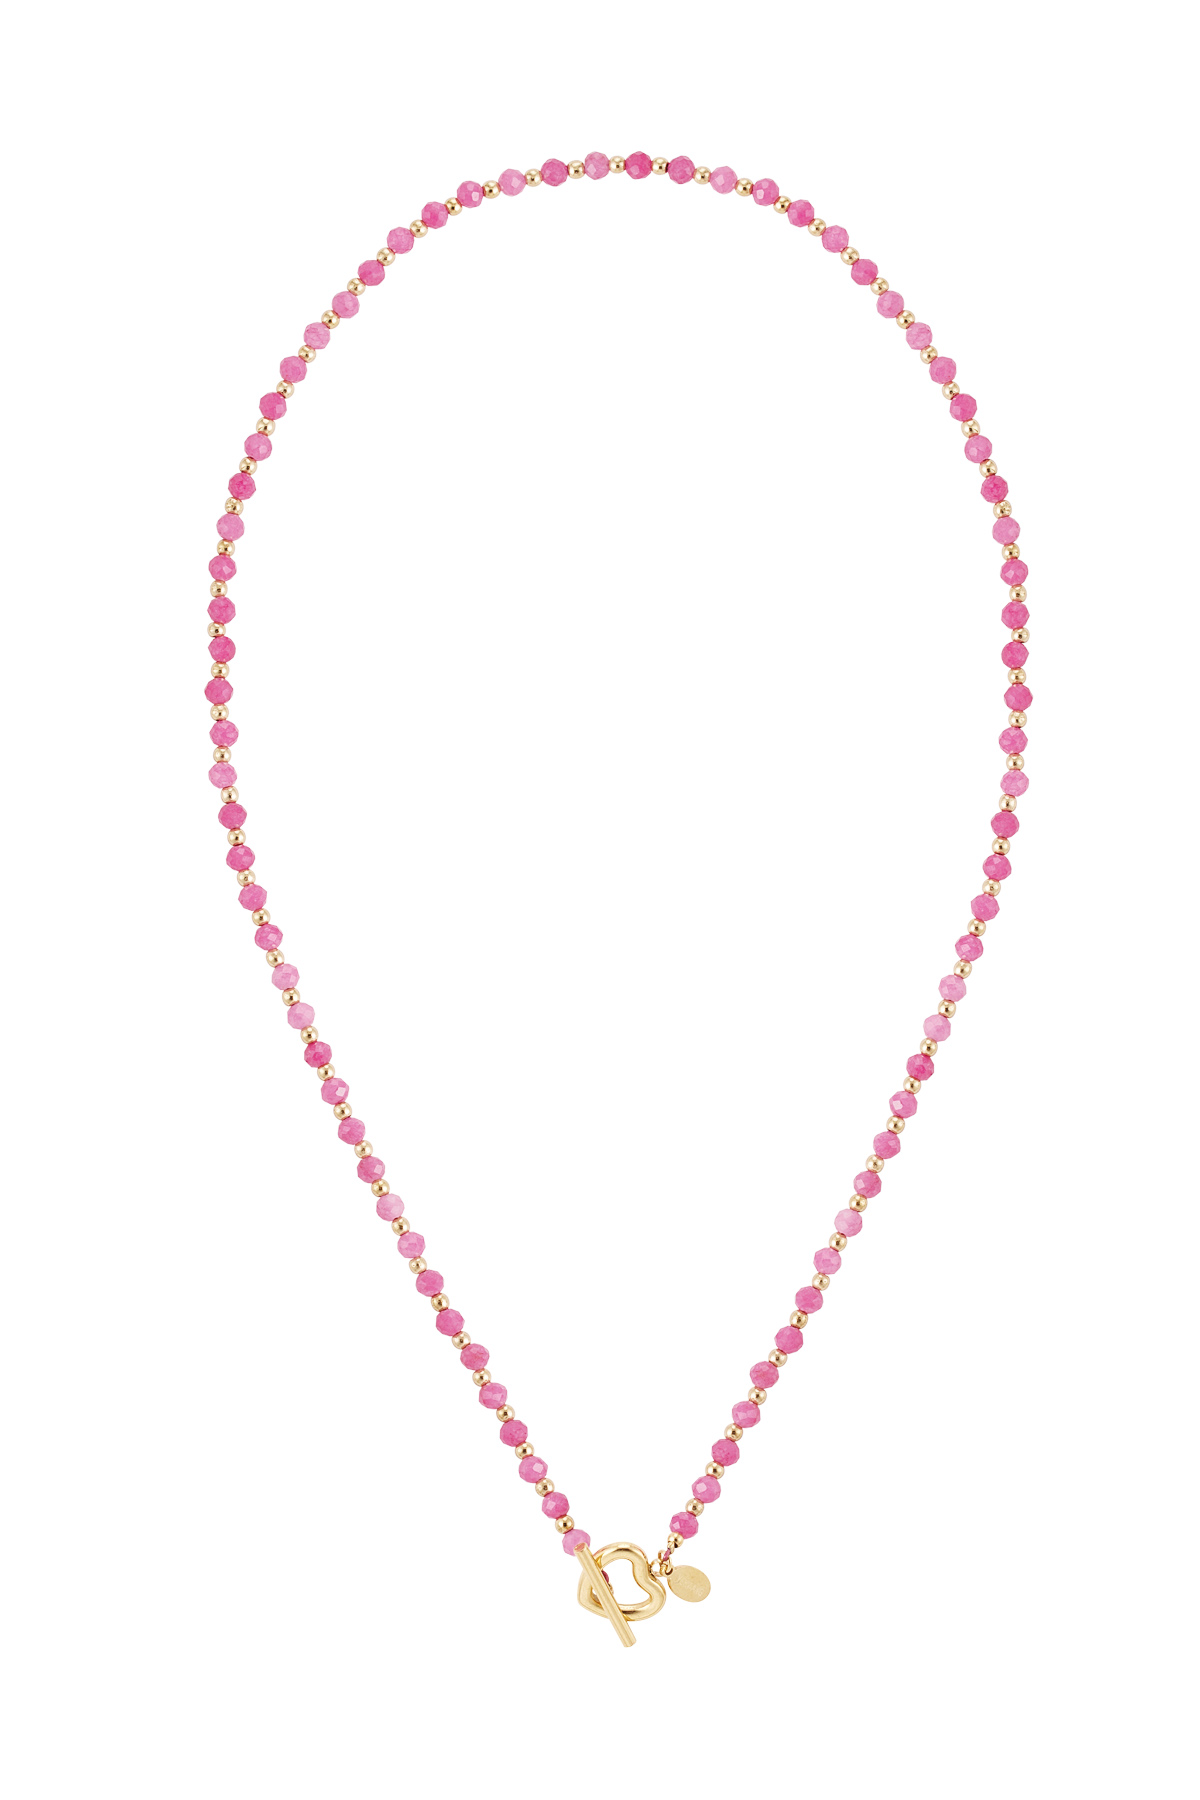 Bead Chain Heart Clasp - Pink &amp; Gold Stainless Steel